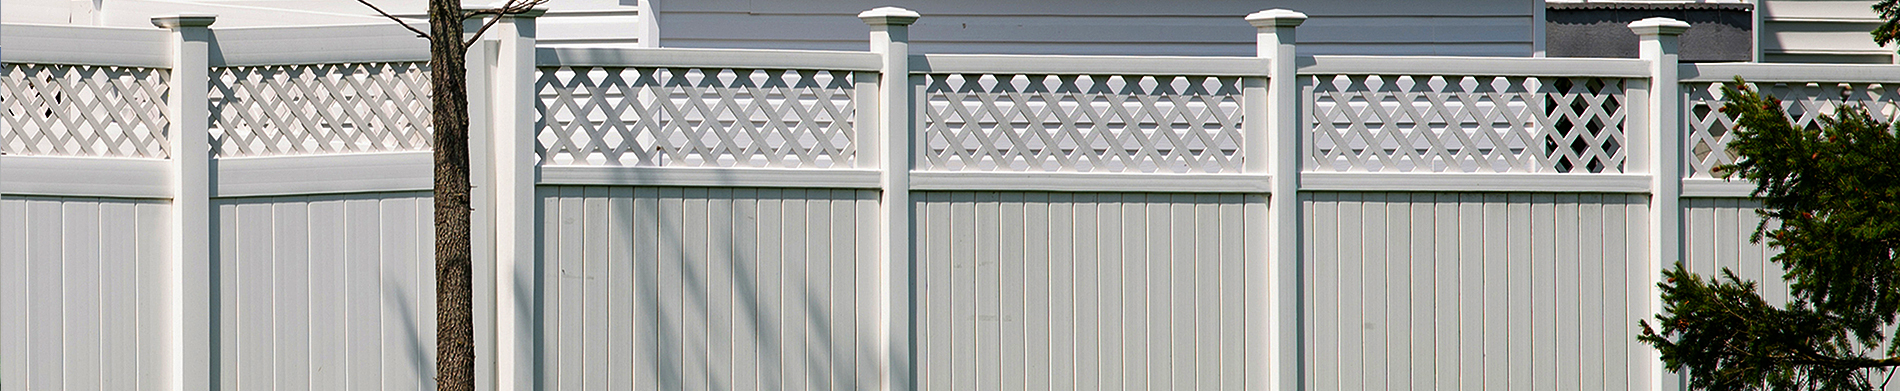 Want To Install Vinyl Privacy Fence Panels? Knowing About Proper Fence Etiquette Is a Must!